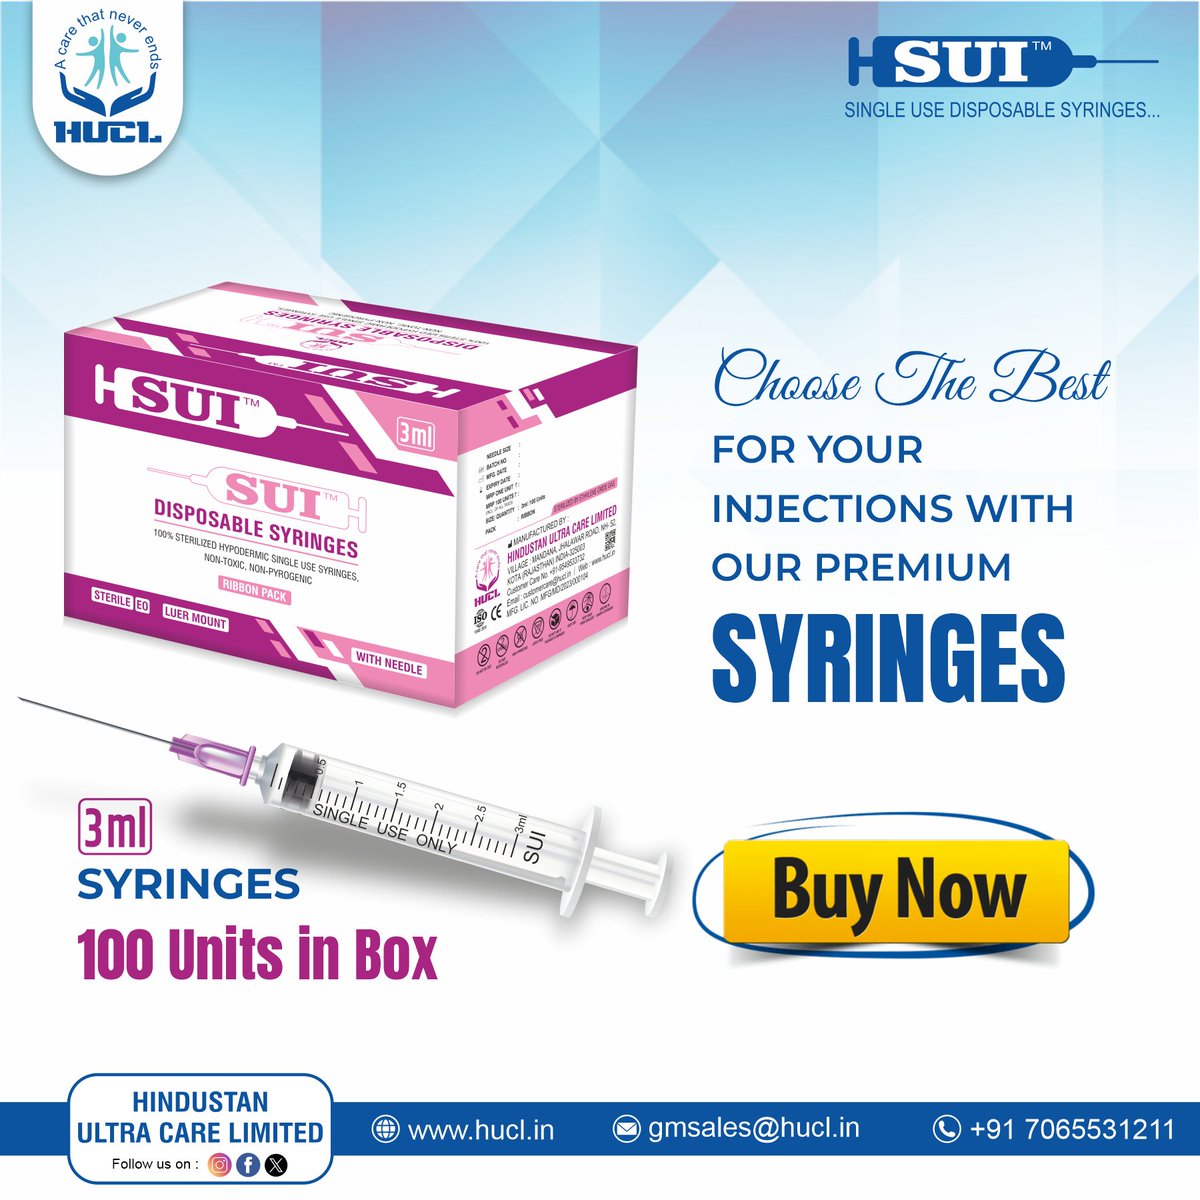 Choose the best for your injections with our premium SYRINGES

#needle #syringes #medicalequipment #hindustan #vaccine
#healthcareadvancements #newproduct #hmdhealthcare
#MedicalDevices #syringeadvertisement #syringe #doctor